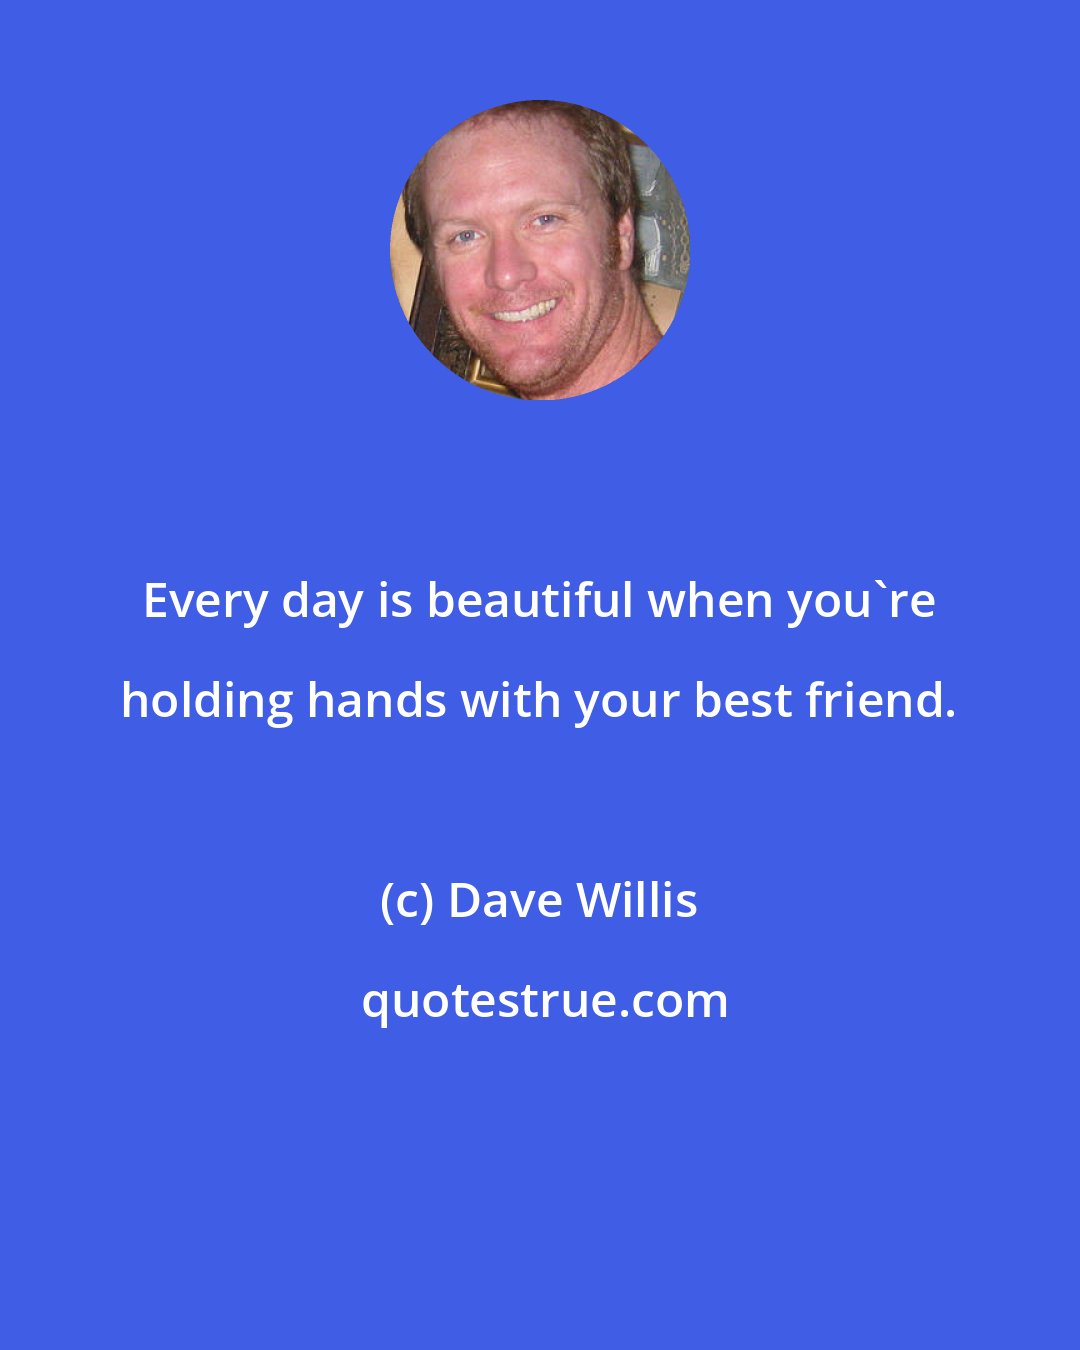 Dave Willis: Every day is beautiful when you're holding hands with your best friend.